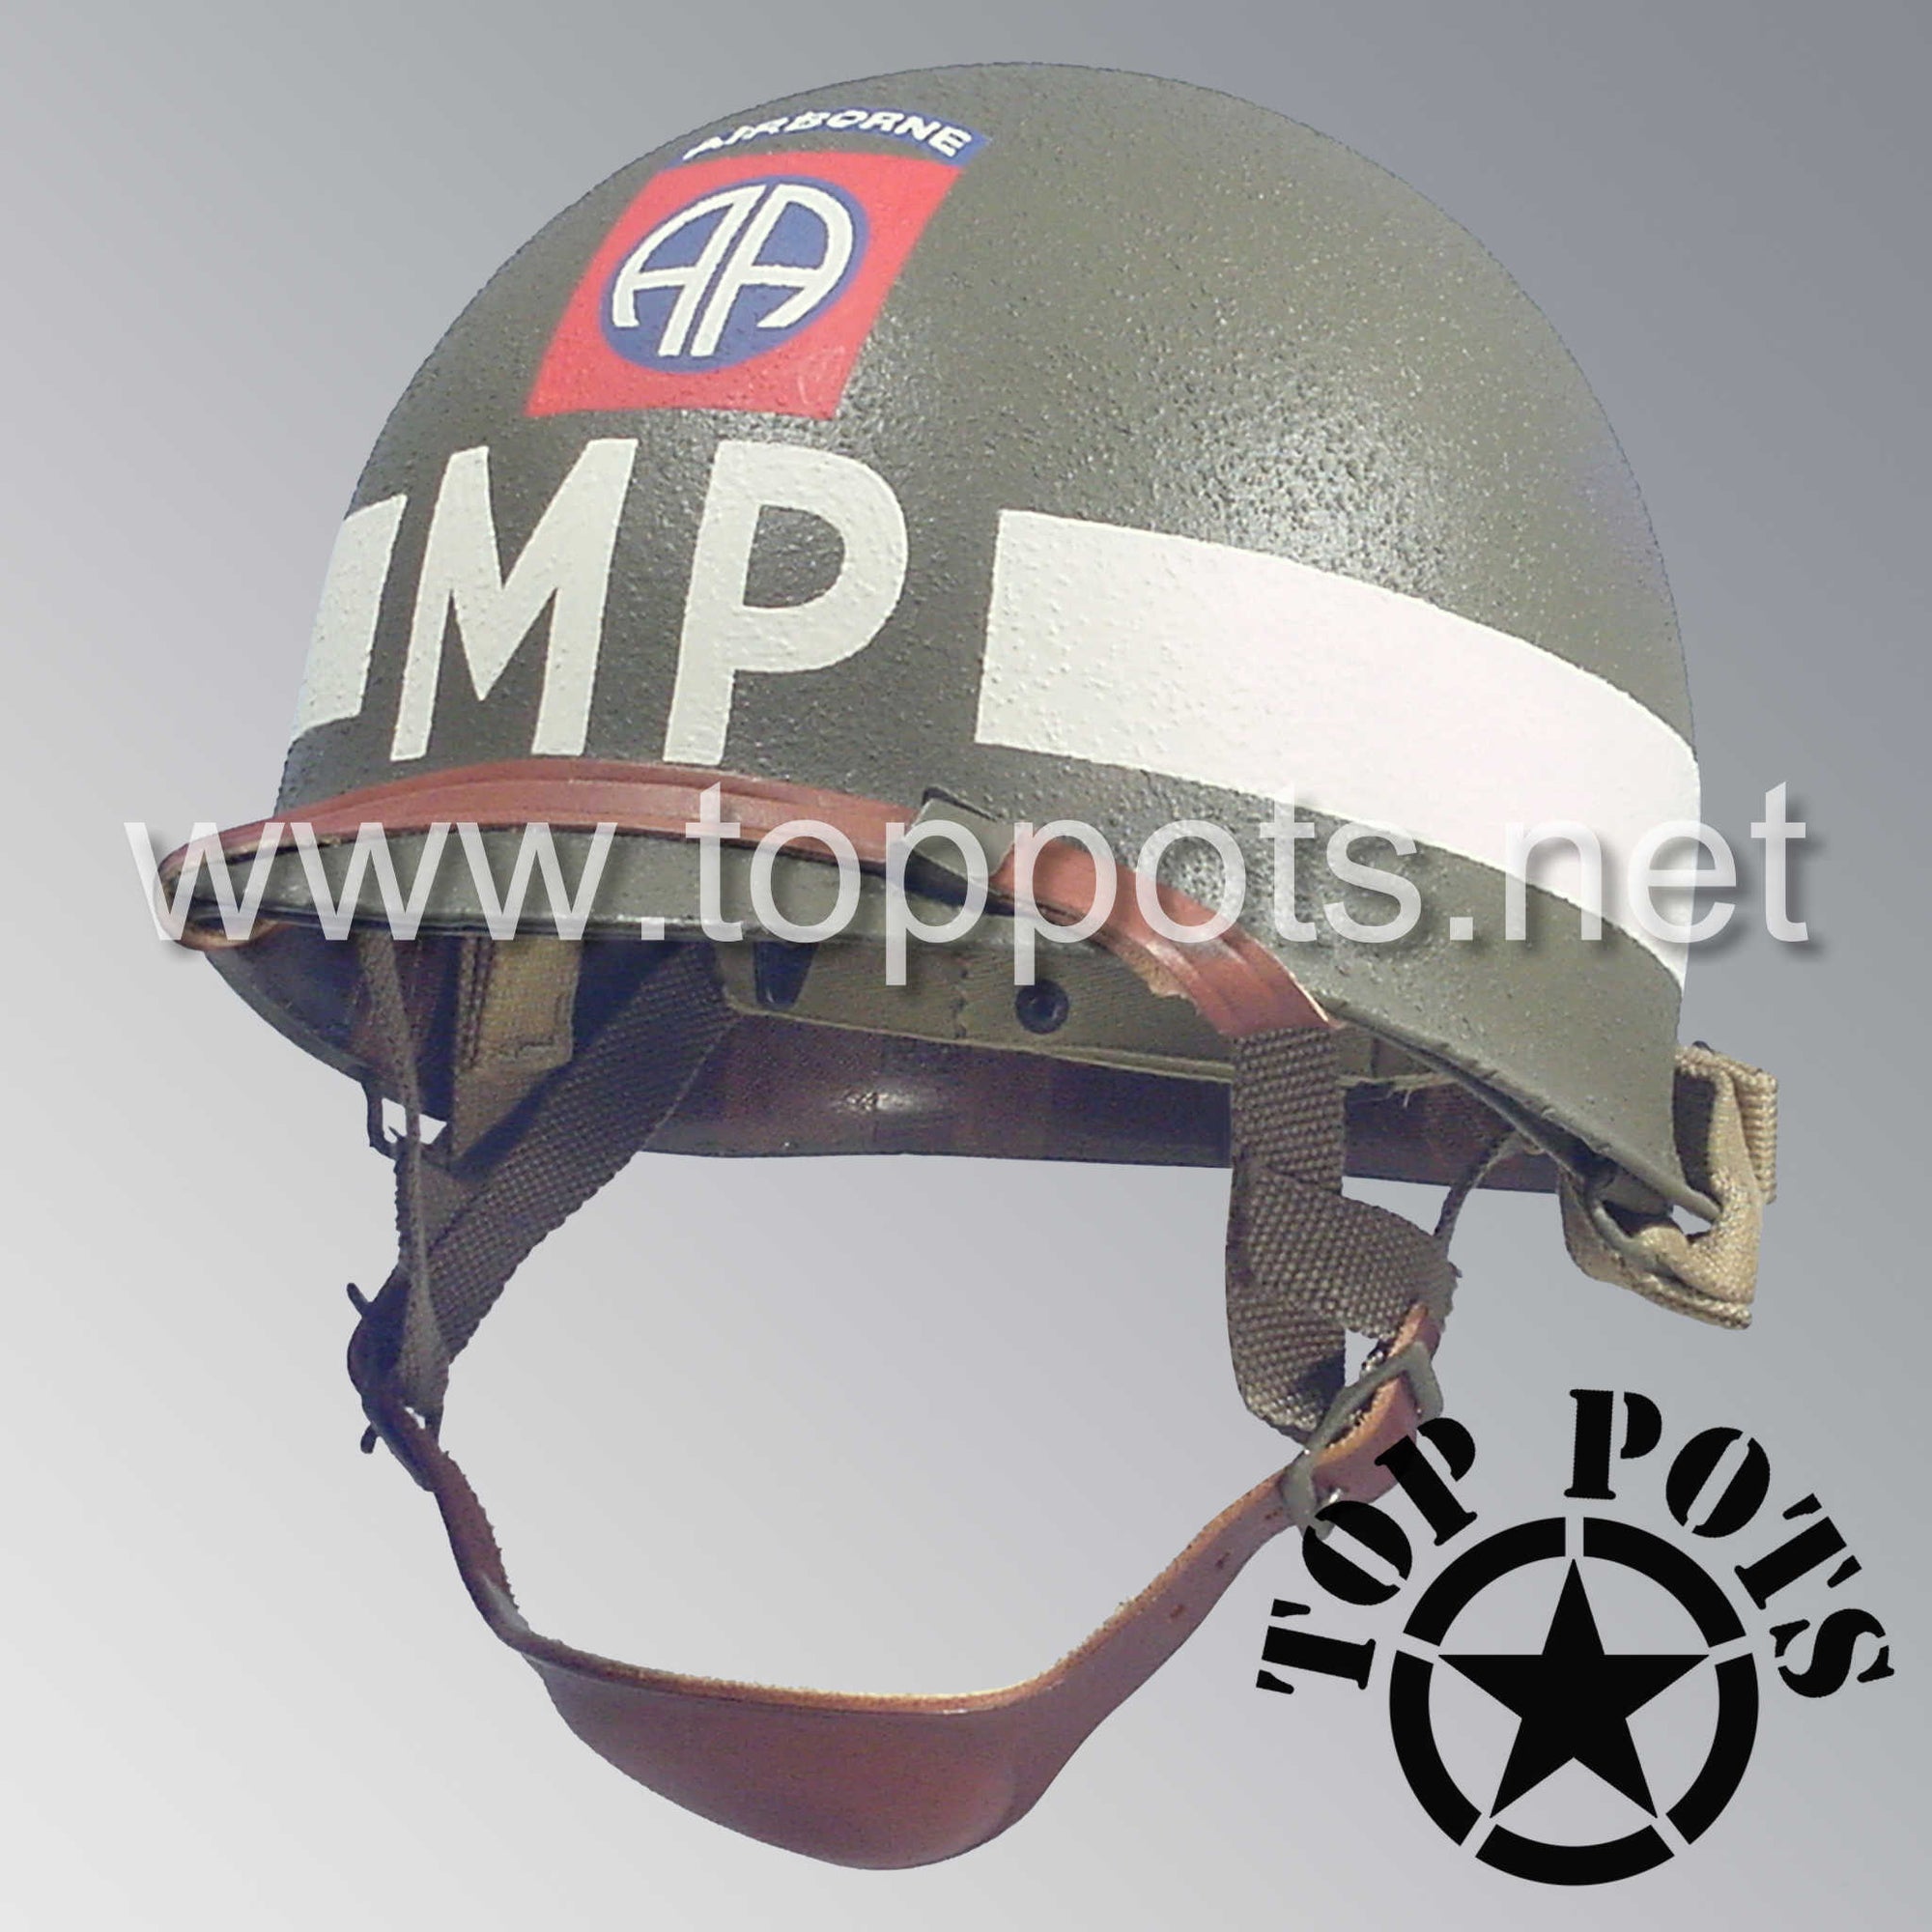 WWII US Army Restored Original M1C Paratrooper Airborne Helmet Swivel Bale Shell and Liner with 82nd Airborne Military Police Battalion MP Emblem